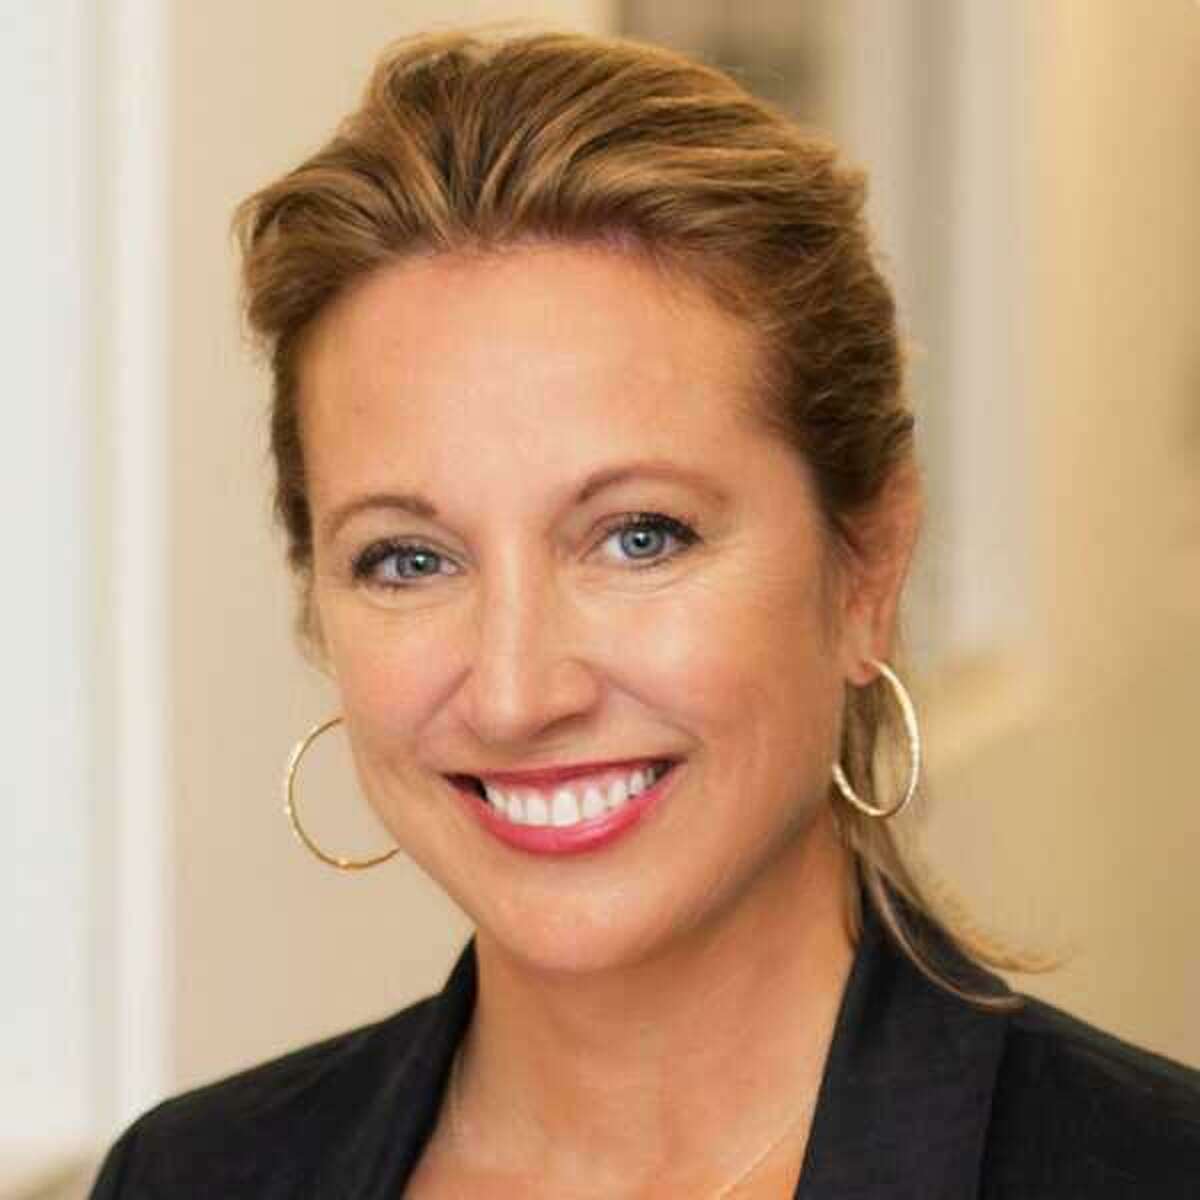 GeneDx CEO and President Katherine Stueland will become co-CEO of Stamford-based Sema4.